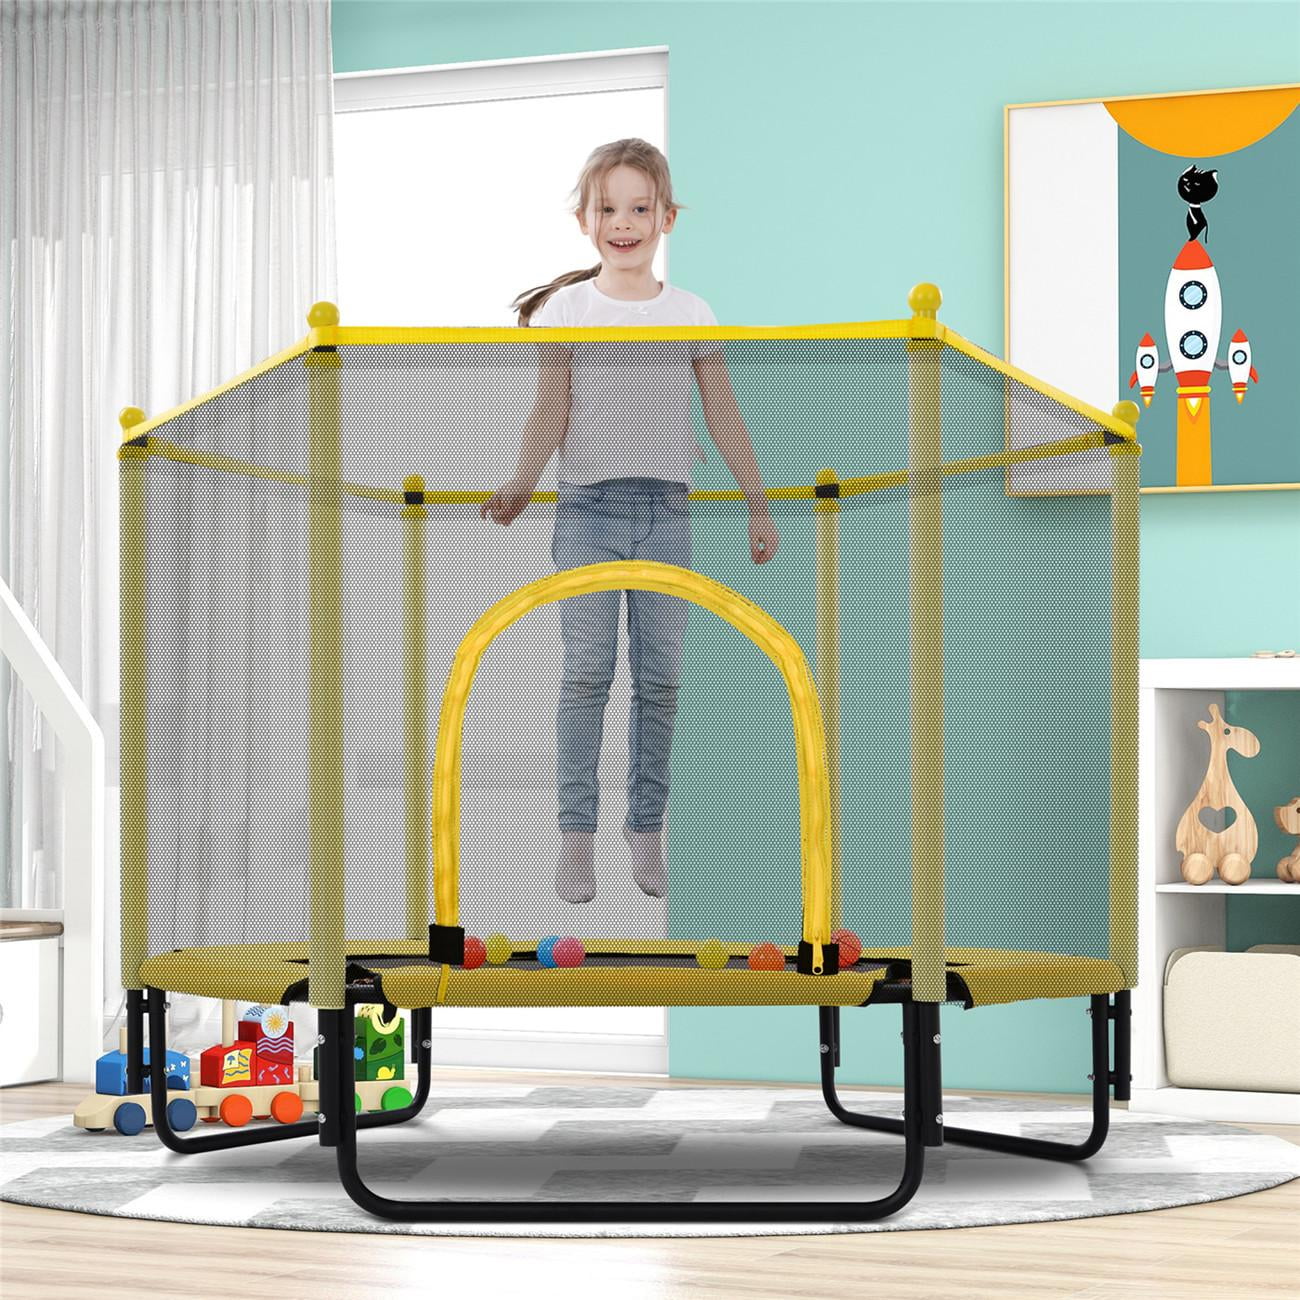 60'' Trampoline for Kids - 5ft Outdoor & Indoor Mini Toddler Trampoline with Enclosure, Basketball Hoop, Birthday Gifts for Kids, Gifts for Boy and Girl, Baby Toddler Trampoline Toys, Age 3-12, Yellow